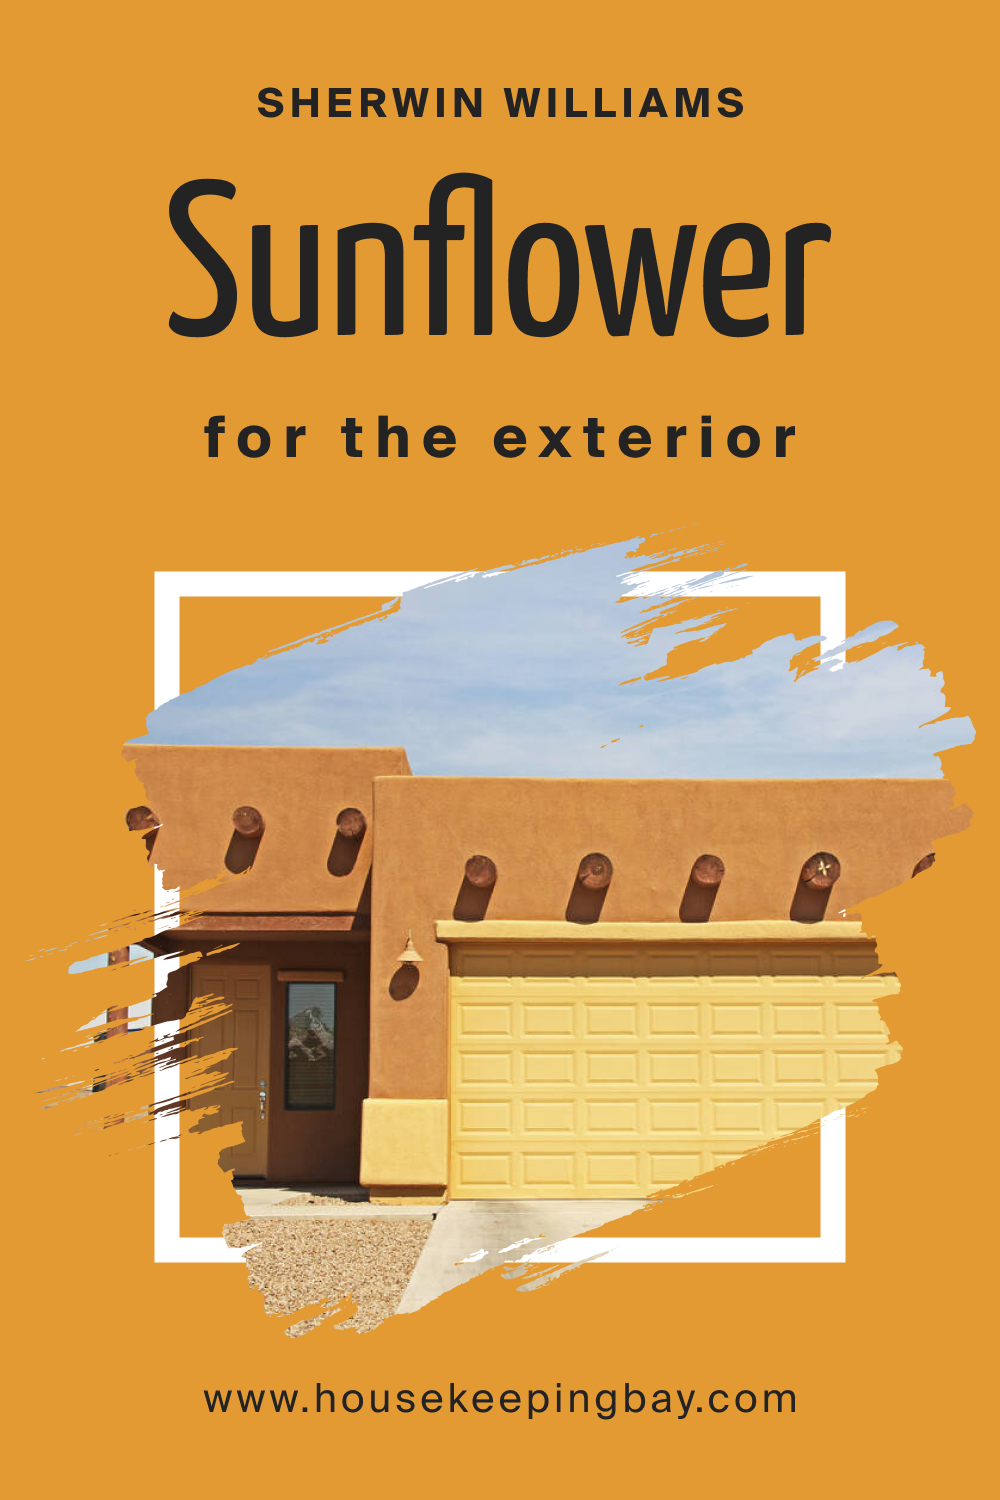 Sherwin Williams. Sunflower SW 6678 For the exterior